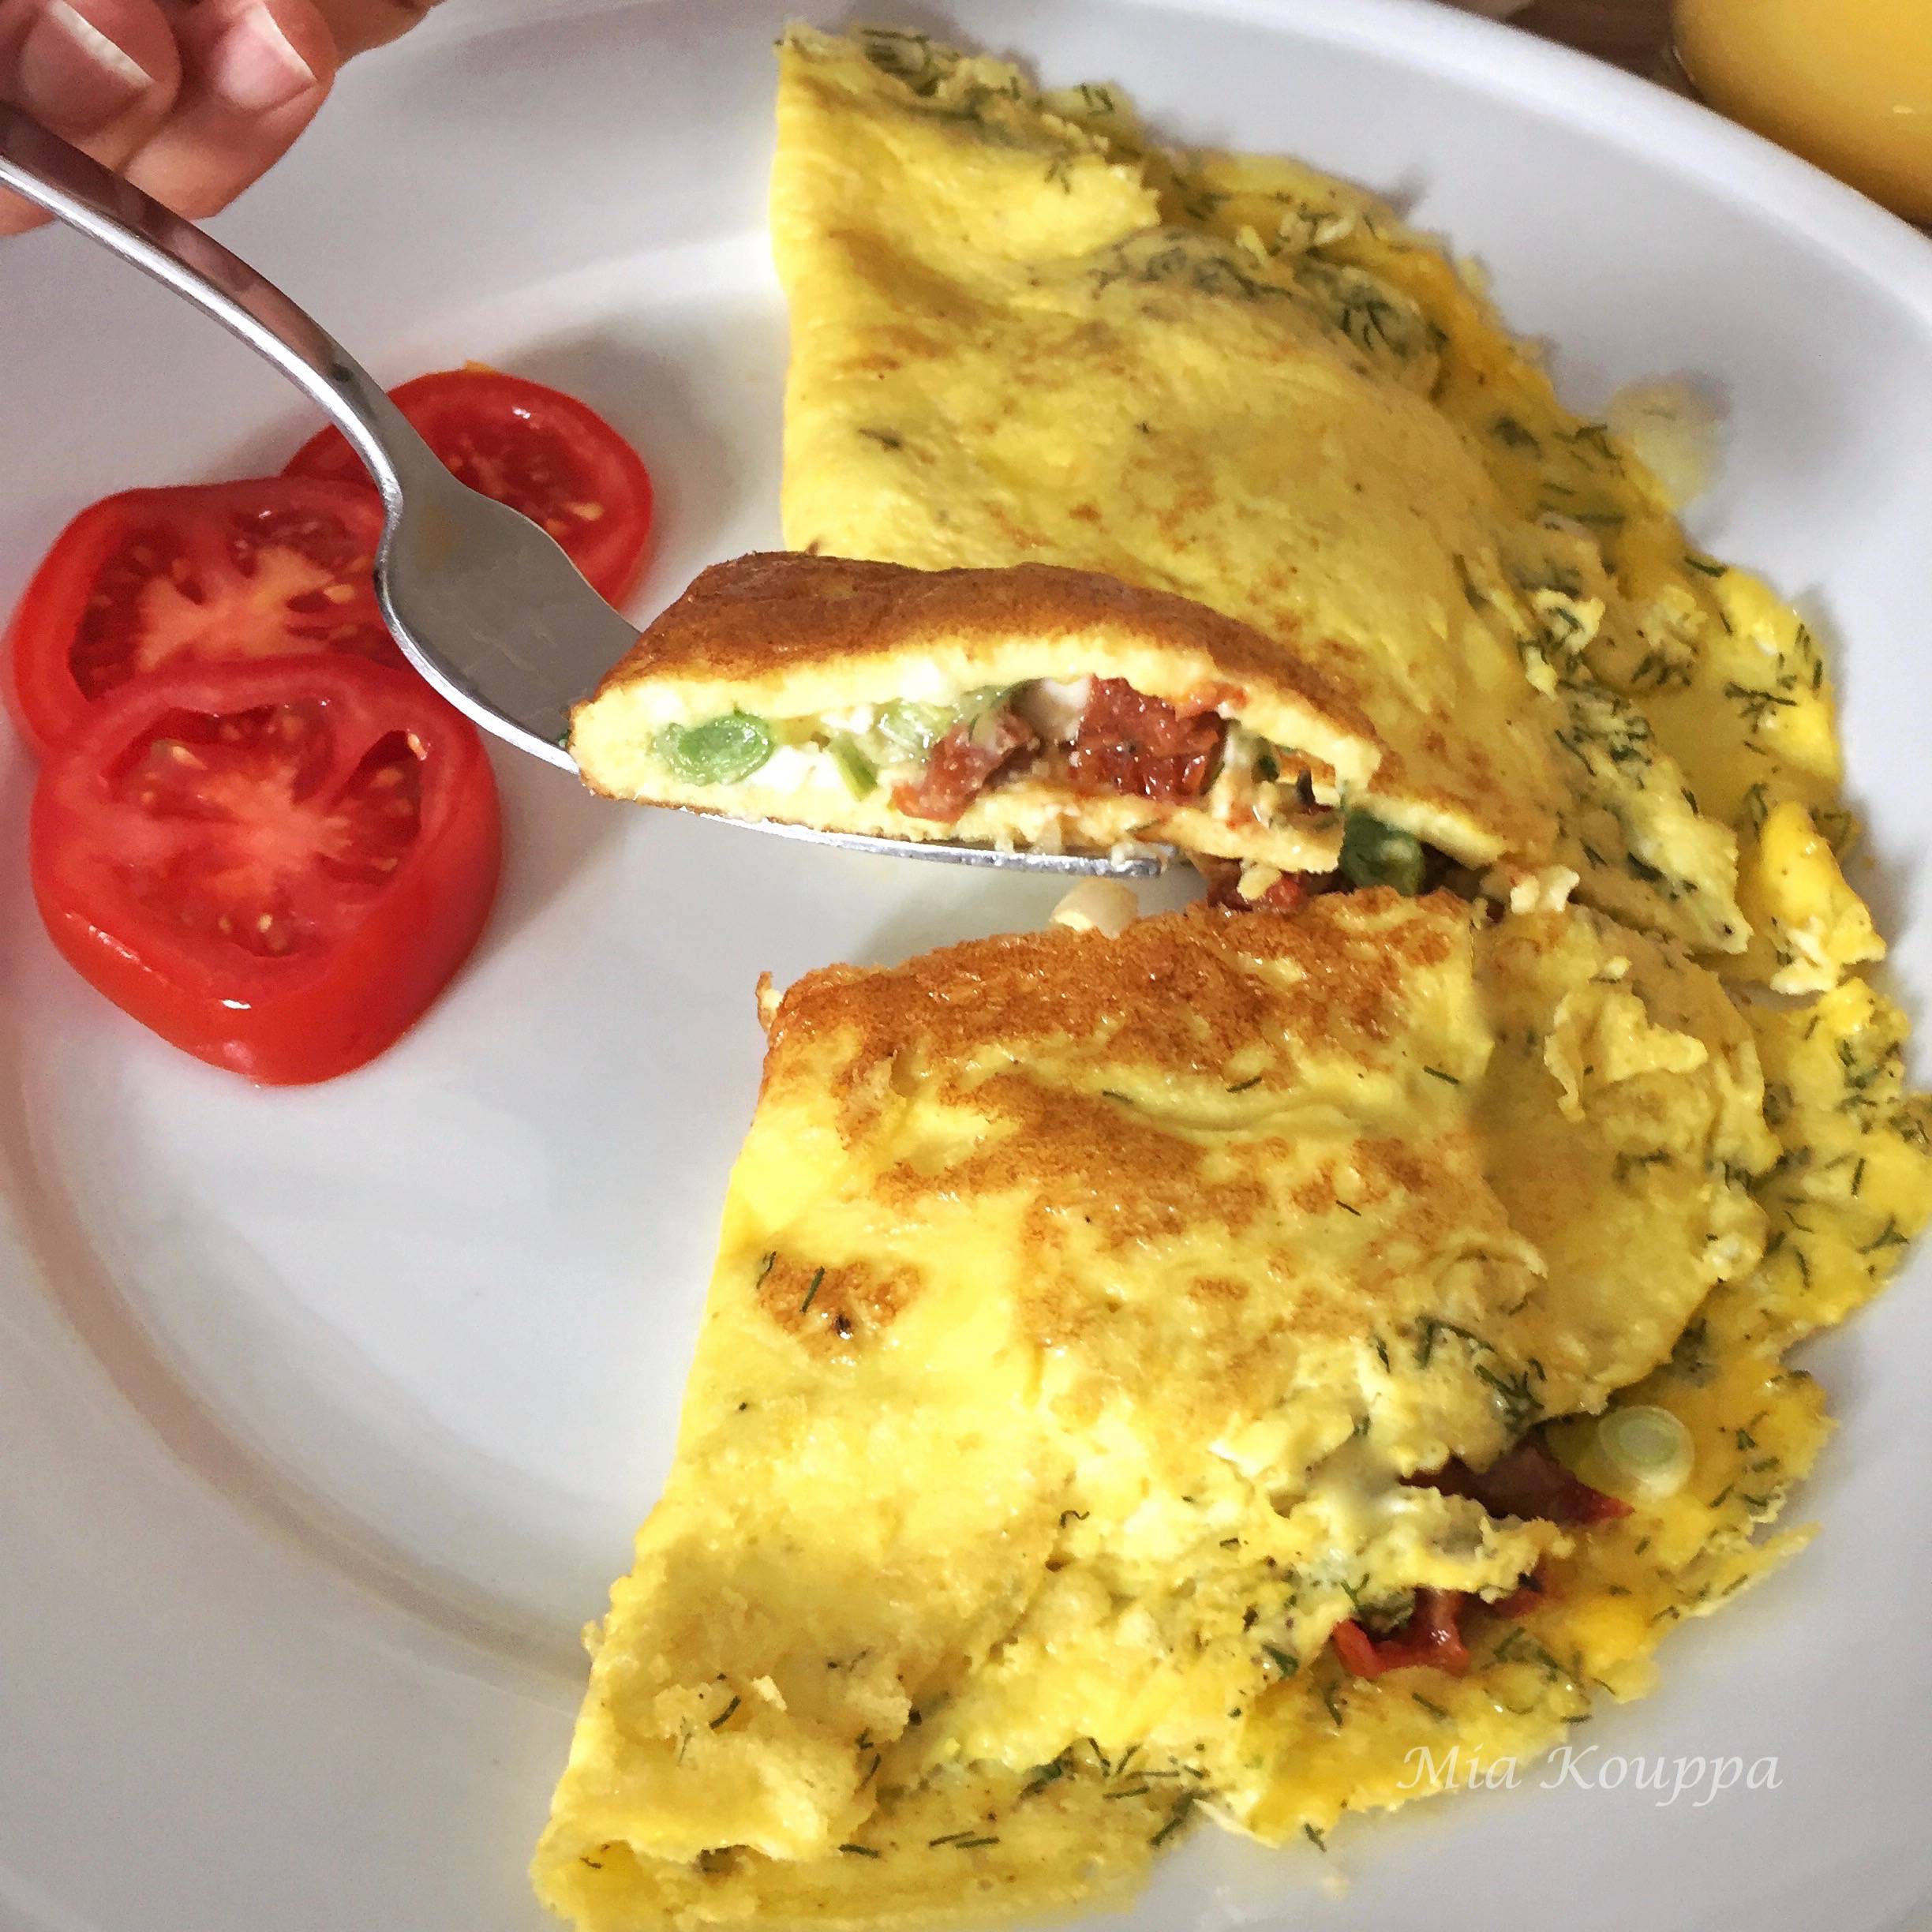 Omelet with feta and sun-dried tomatoes